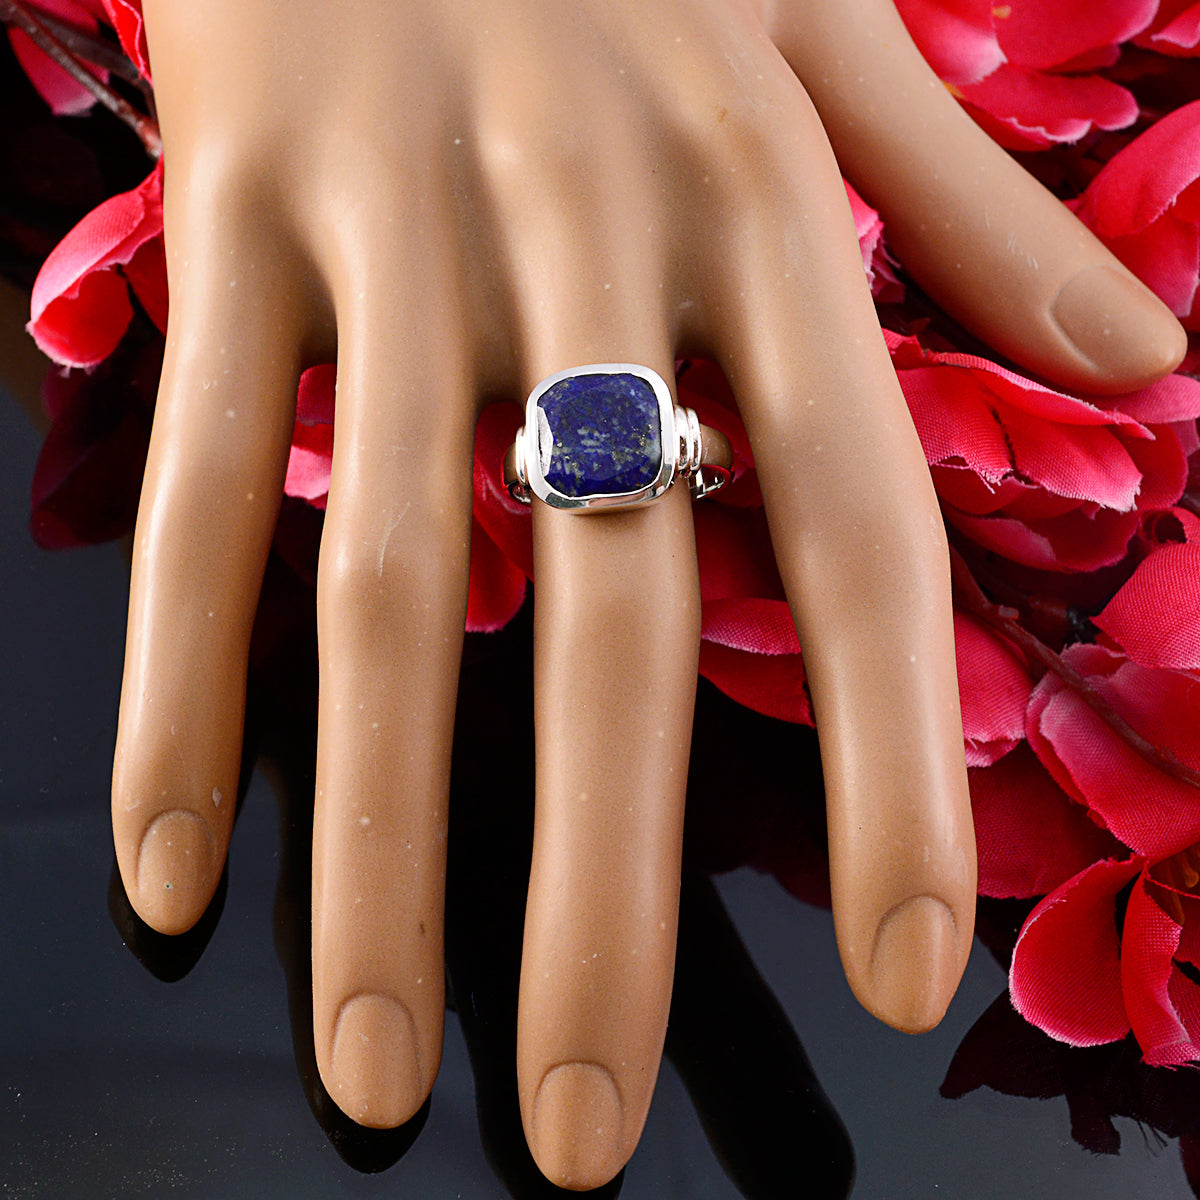 Fine-Looking Gems Lapis Lazuli Solid Silver Rings Solder Jewelry